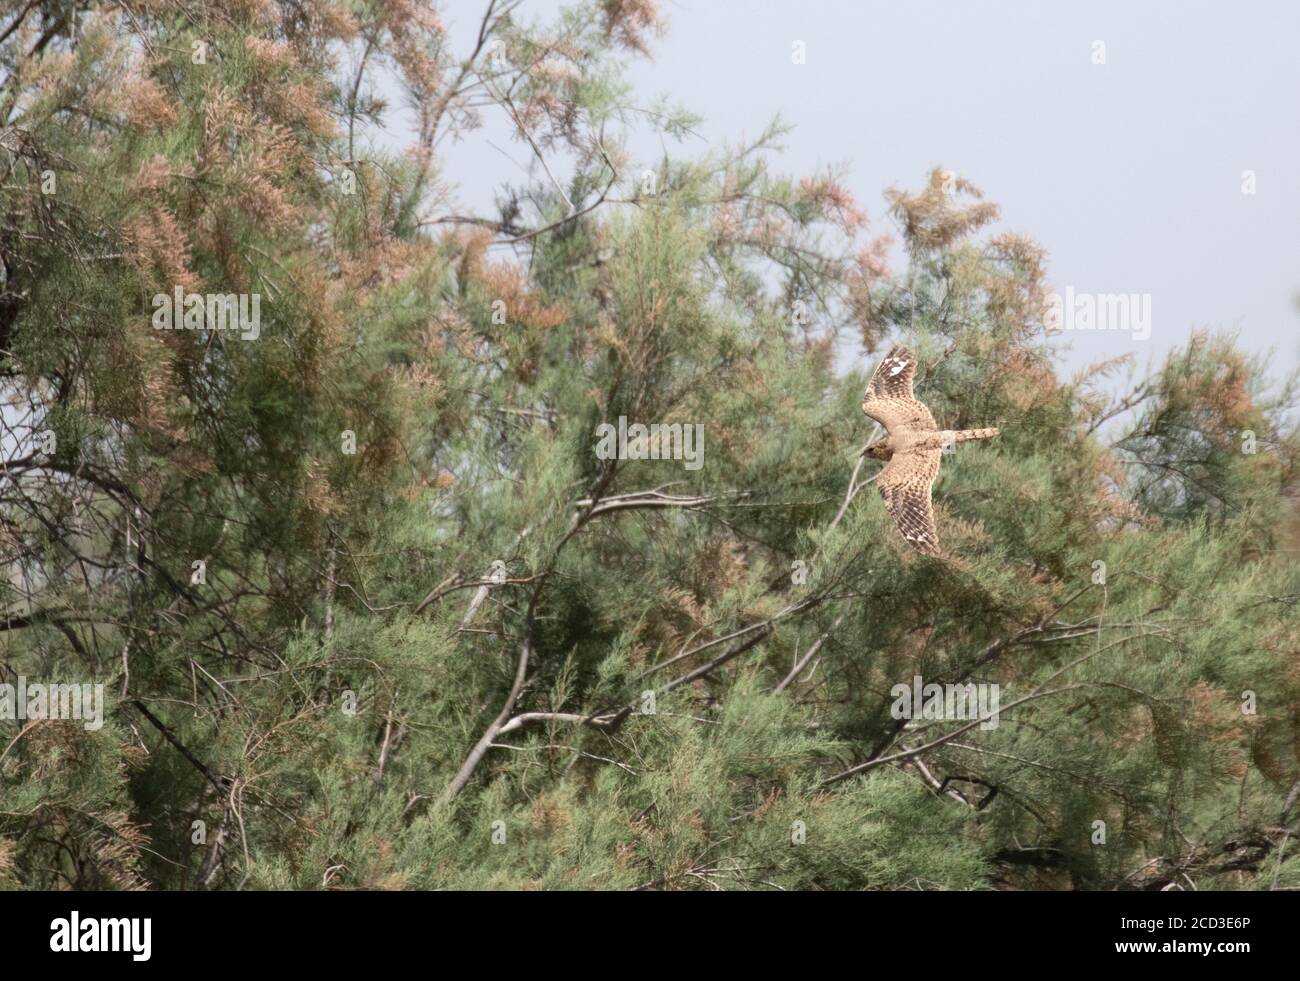 Egyptian nightjar (Caprimulgus aegyptius), in flight in front of trees, view from above, Africa Stock Photo